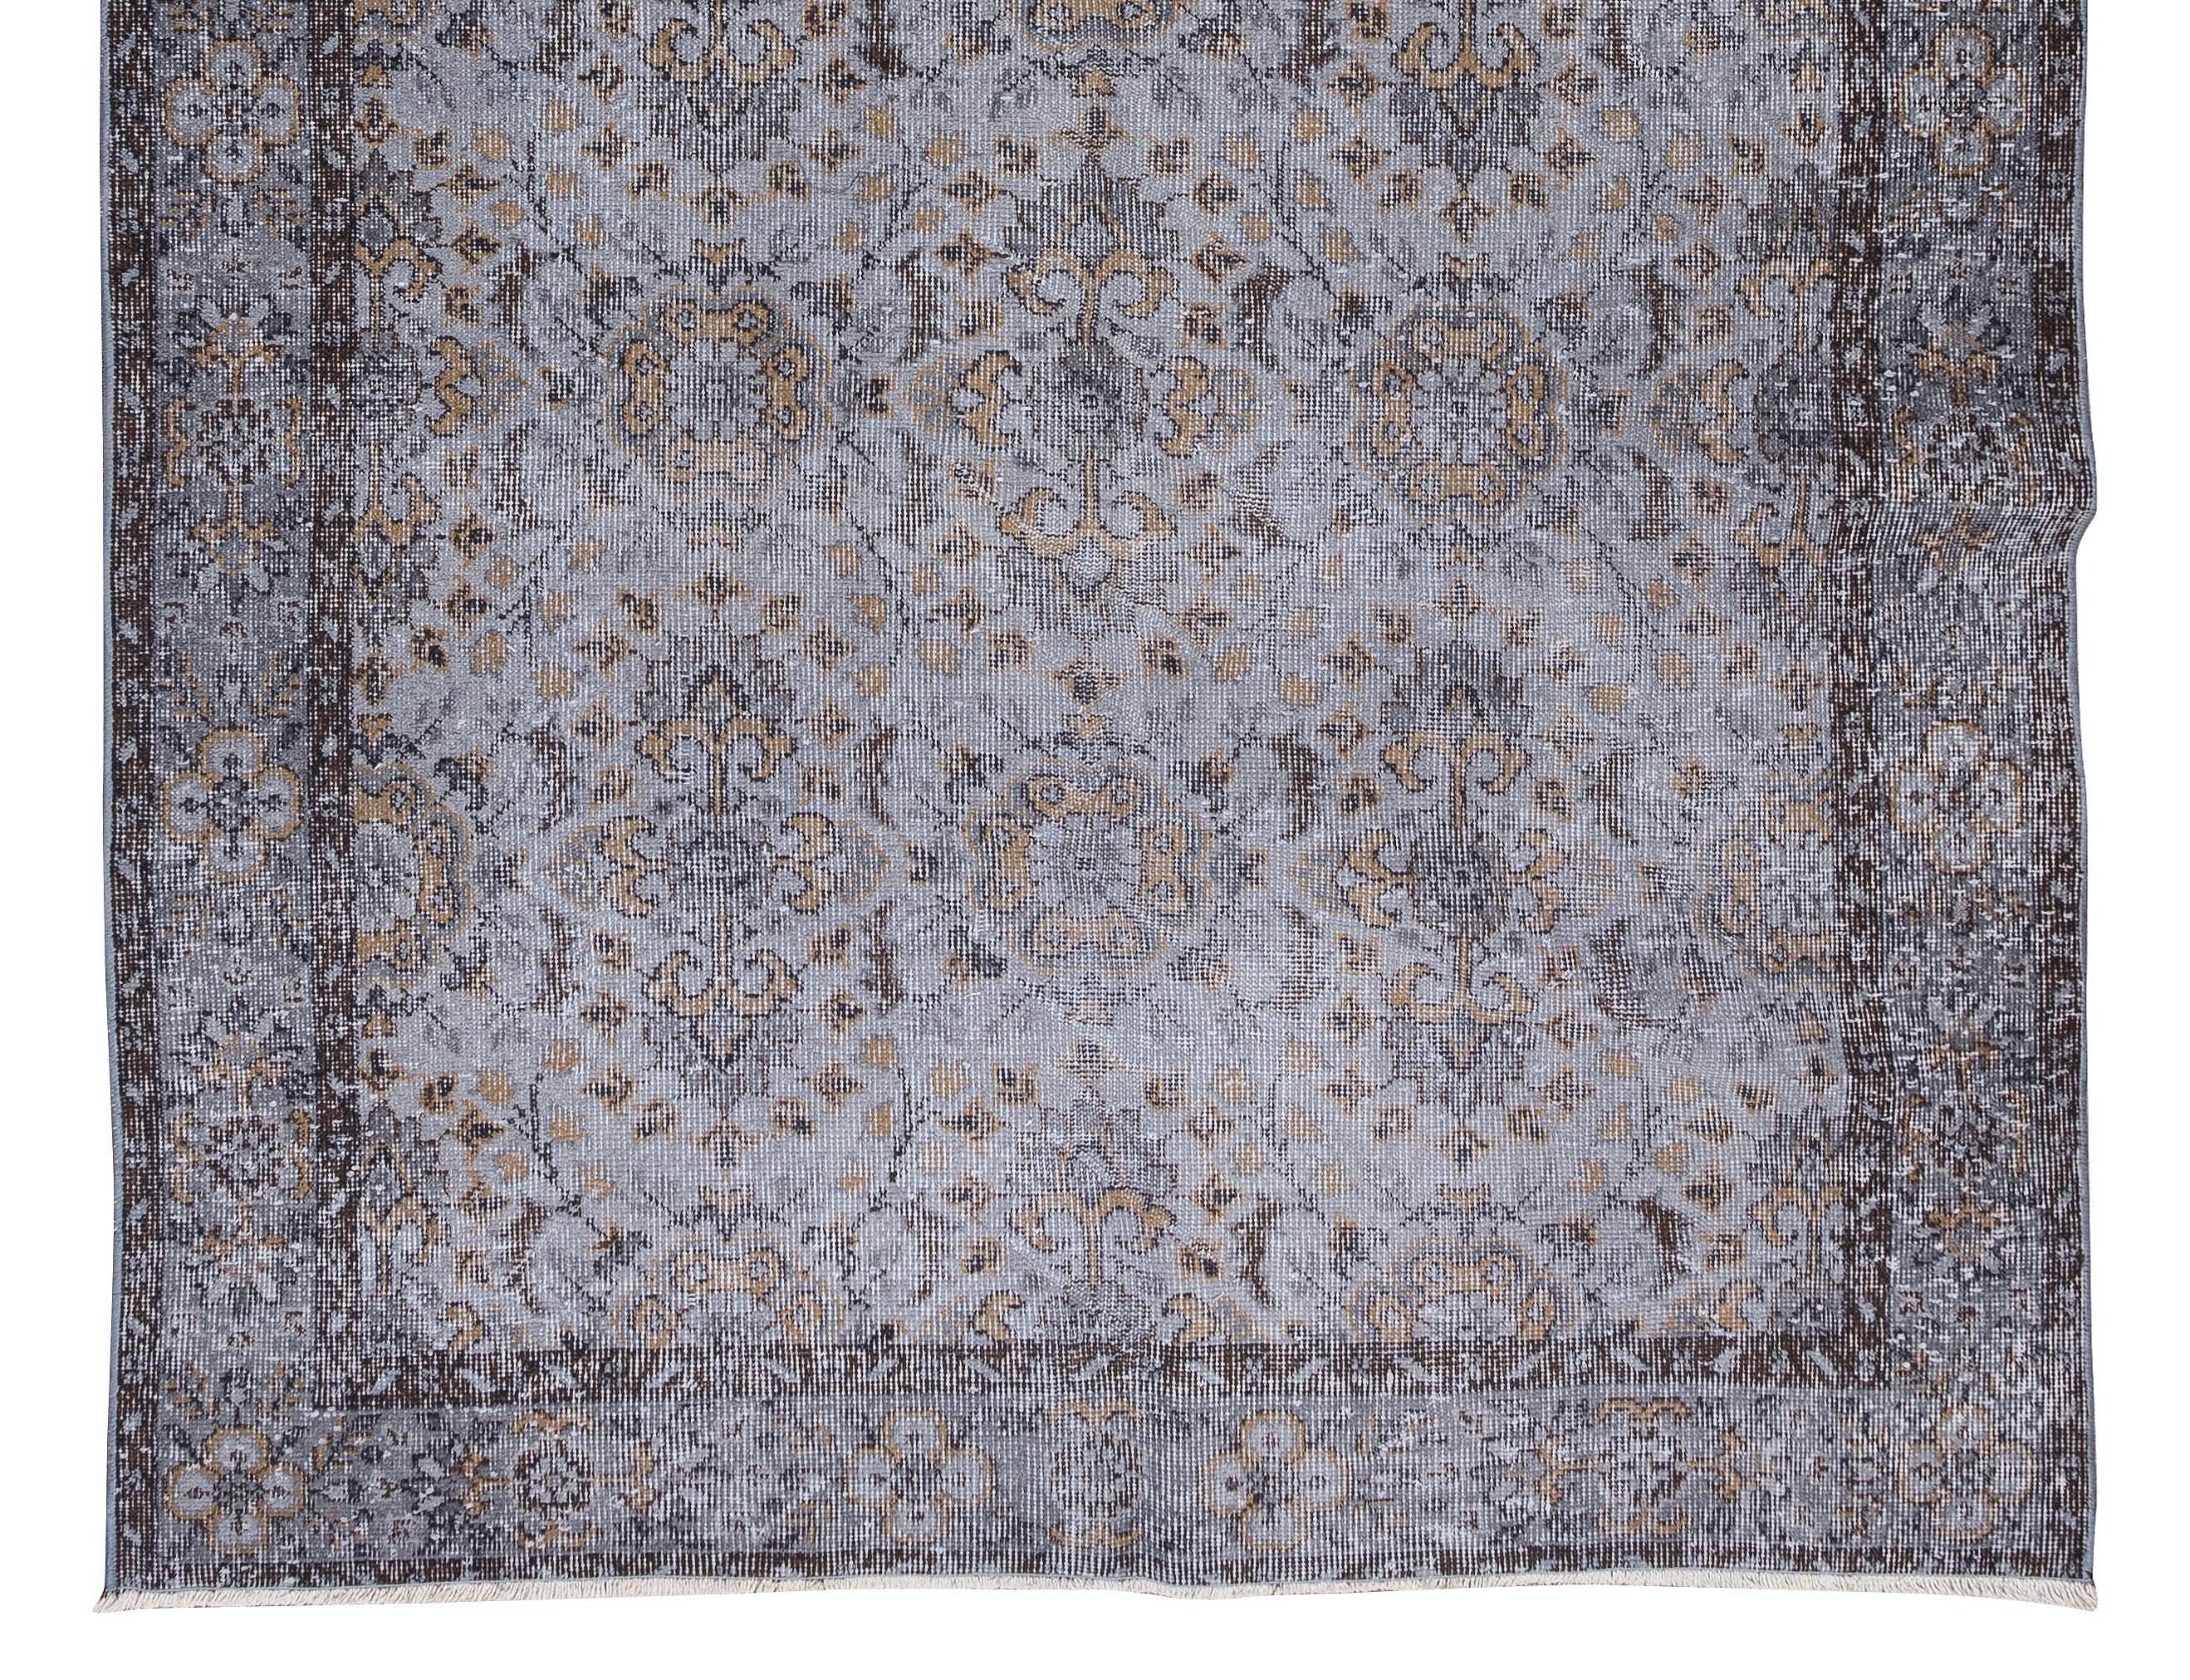 Hand-Woven 5.5x9 Ft Vintage Floral Area Rug in Gray, Hand Knotted in Turkey. Modern Carpet For Sale